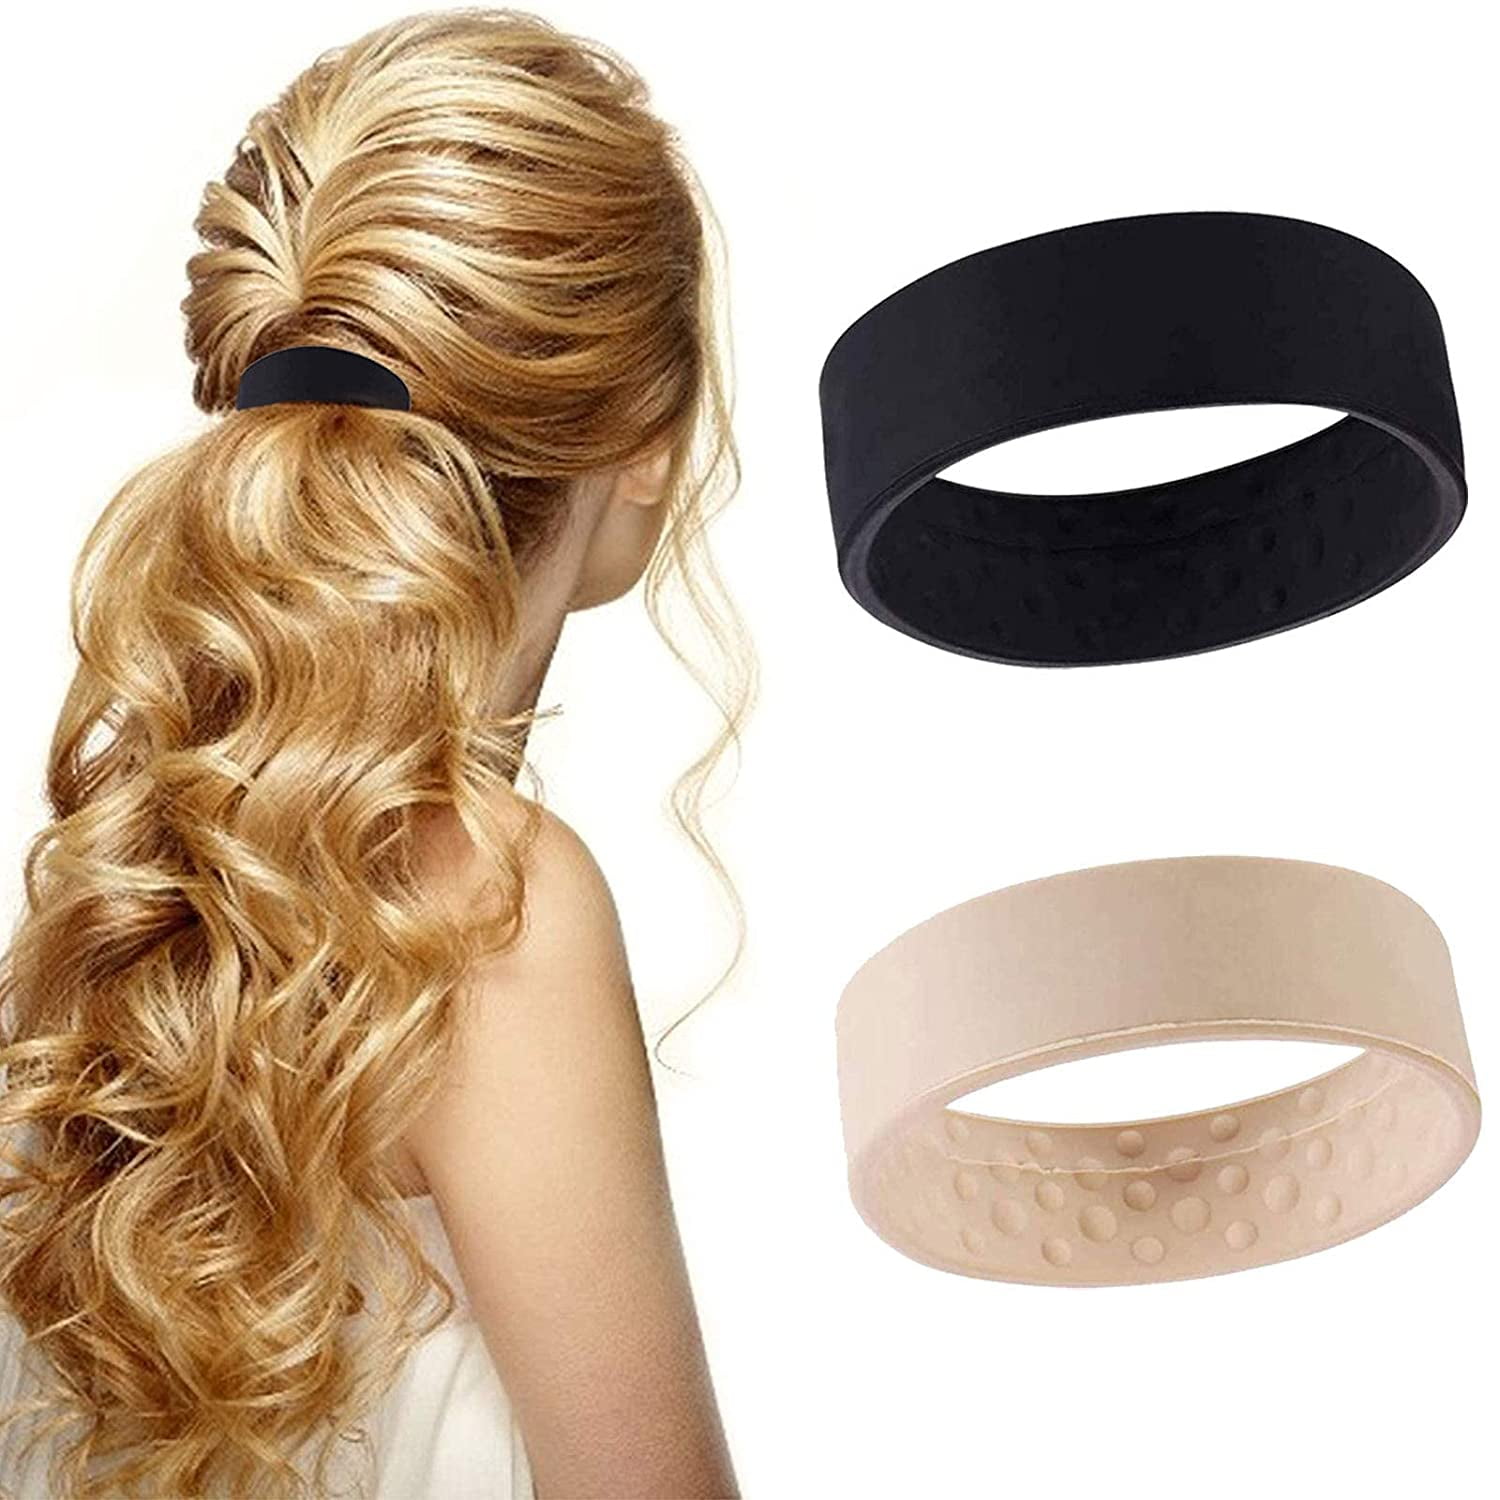 Silicone Hair Tie Bandes élastiques Ponytail Holder Multifonction